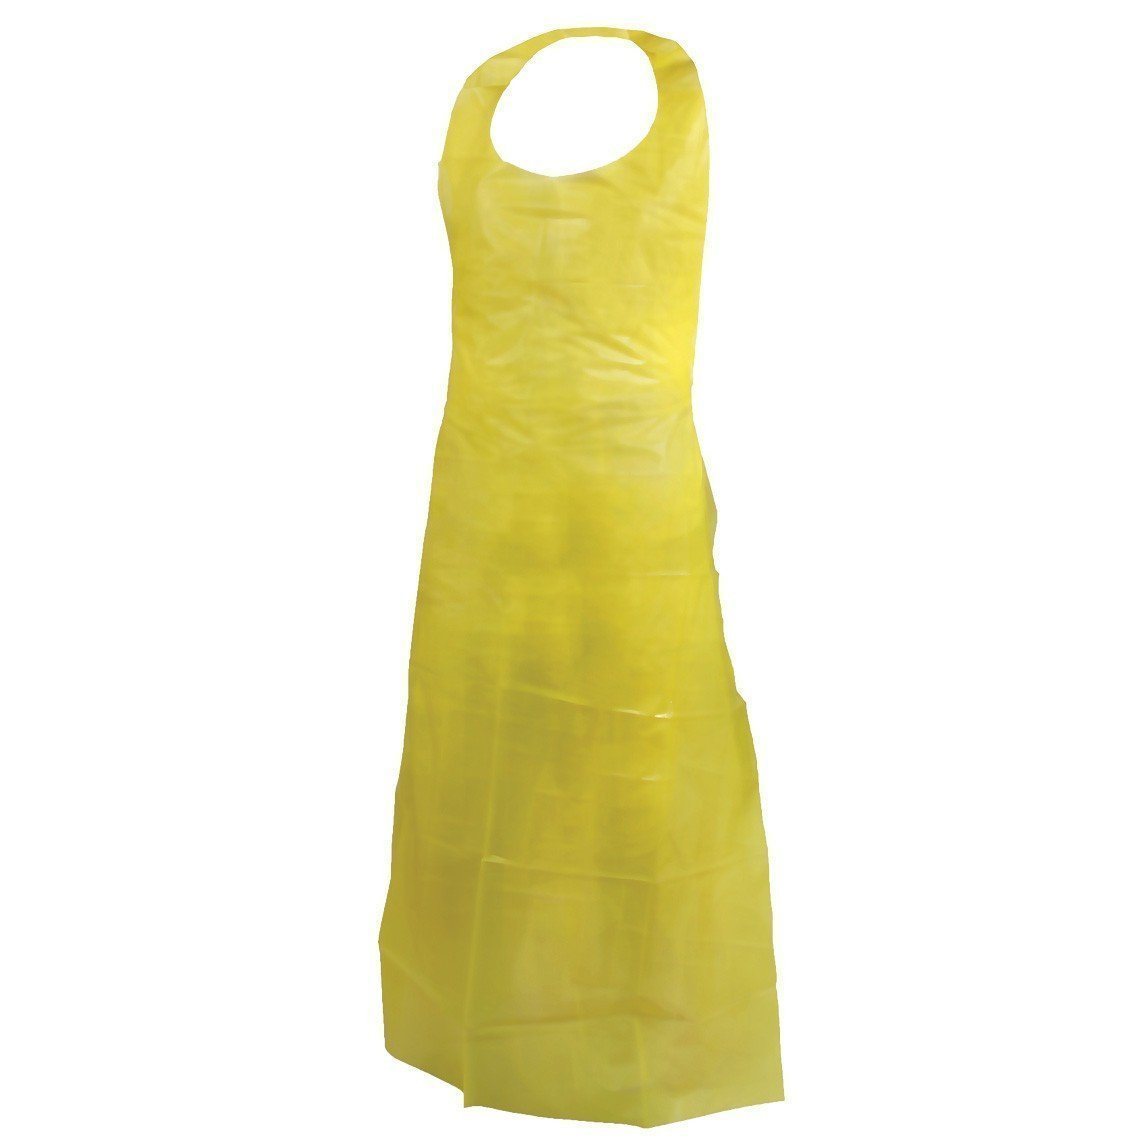 Yellow Disposable Polyethylene Apron (Case of 250 Aprons) - Hi Vis Safety